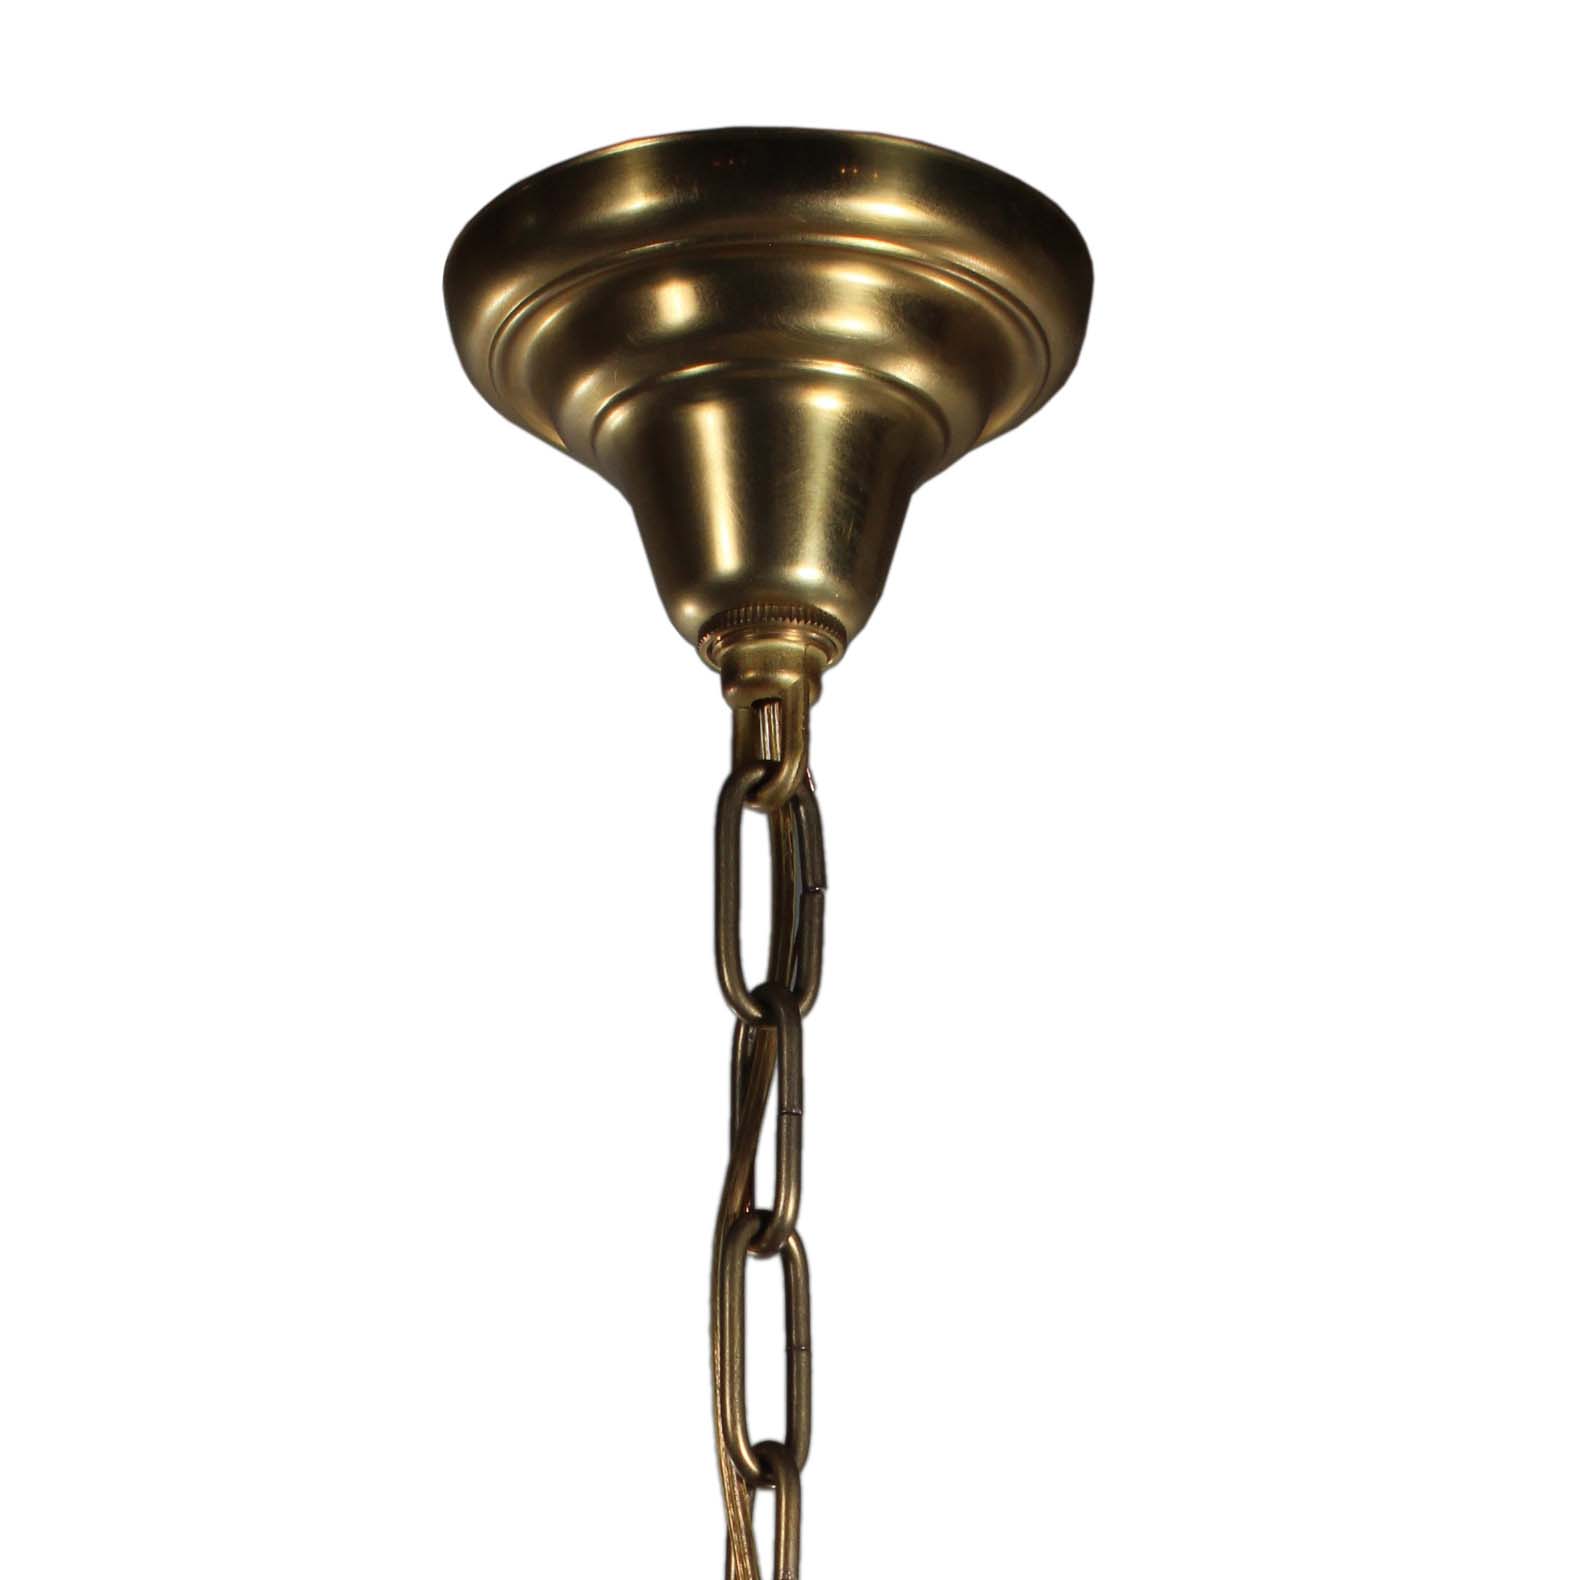 SOLD Antique Brass Art Deco Skyscraper Pendant Light with Two-Part Prismatic Shade-70483